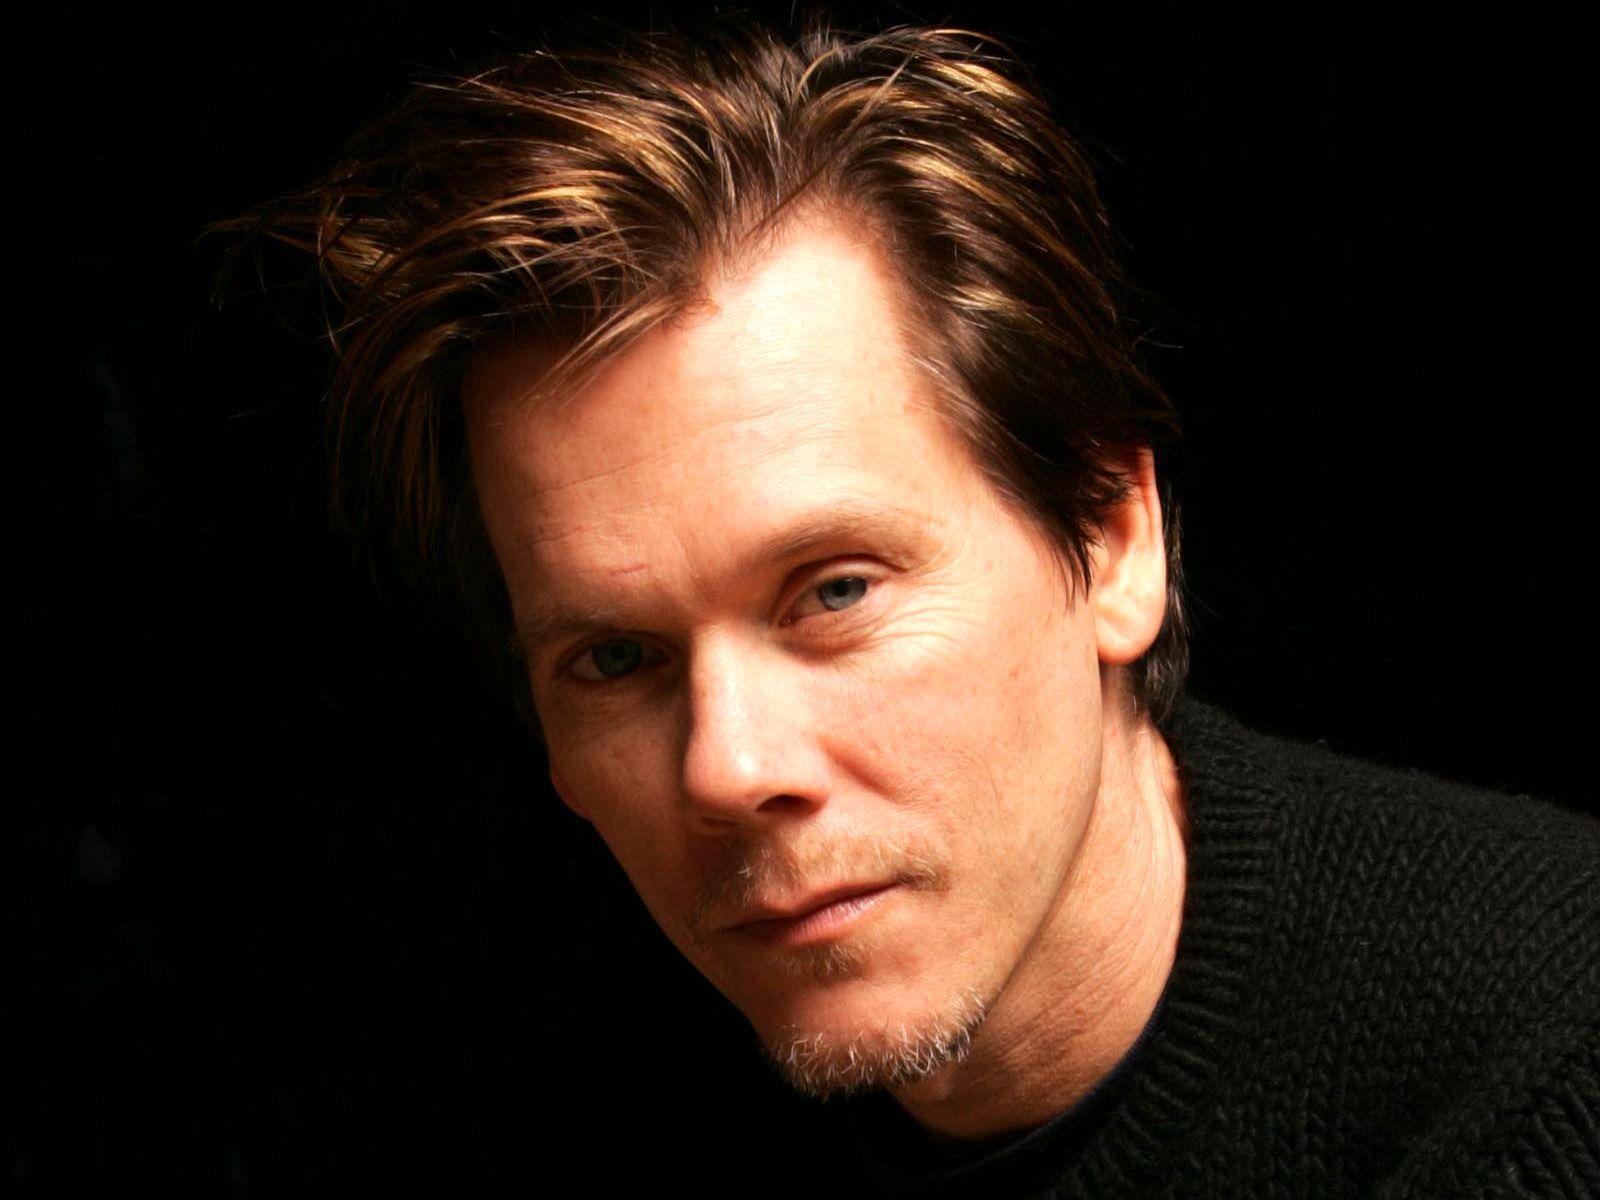 10) One way or another. Kevin Bacon, actor, related to everyone